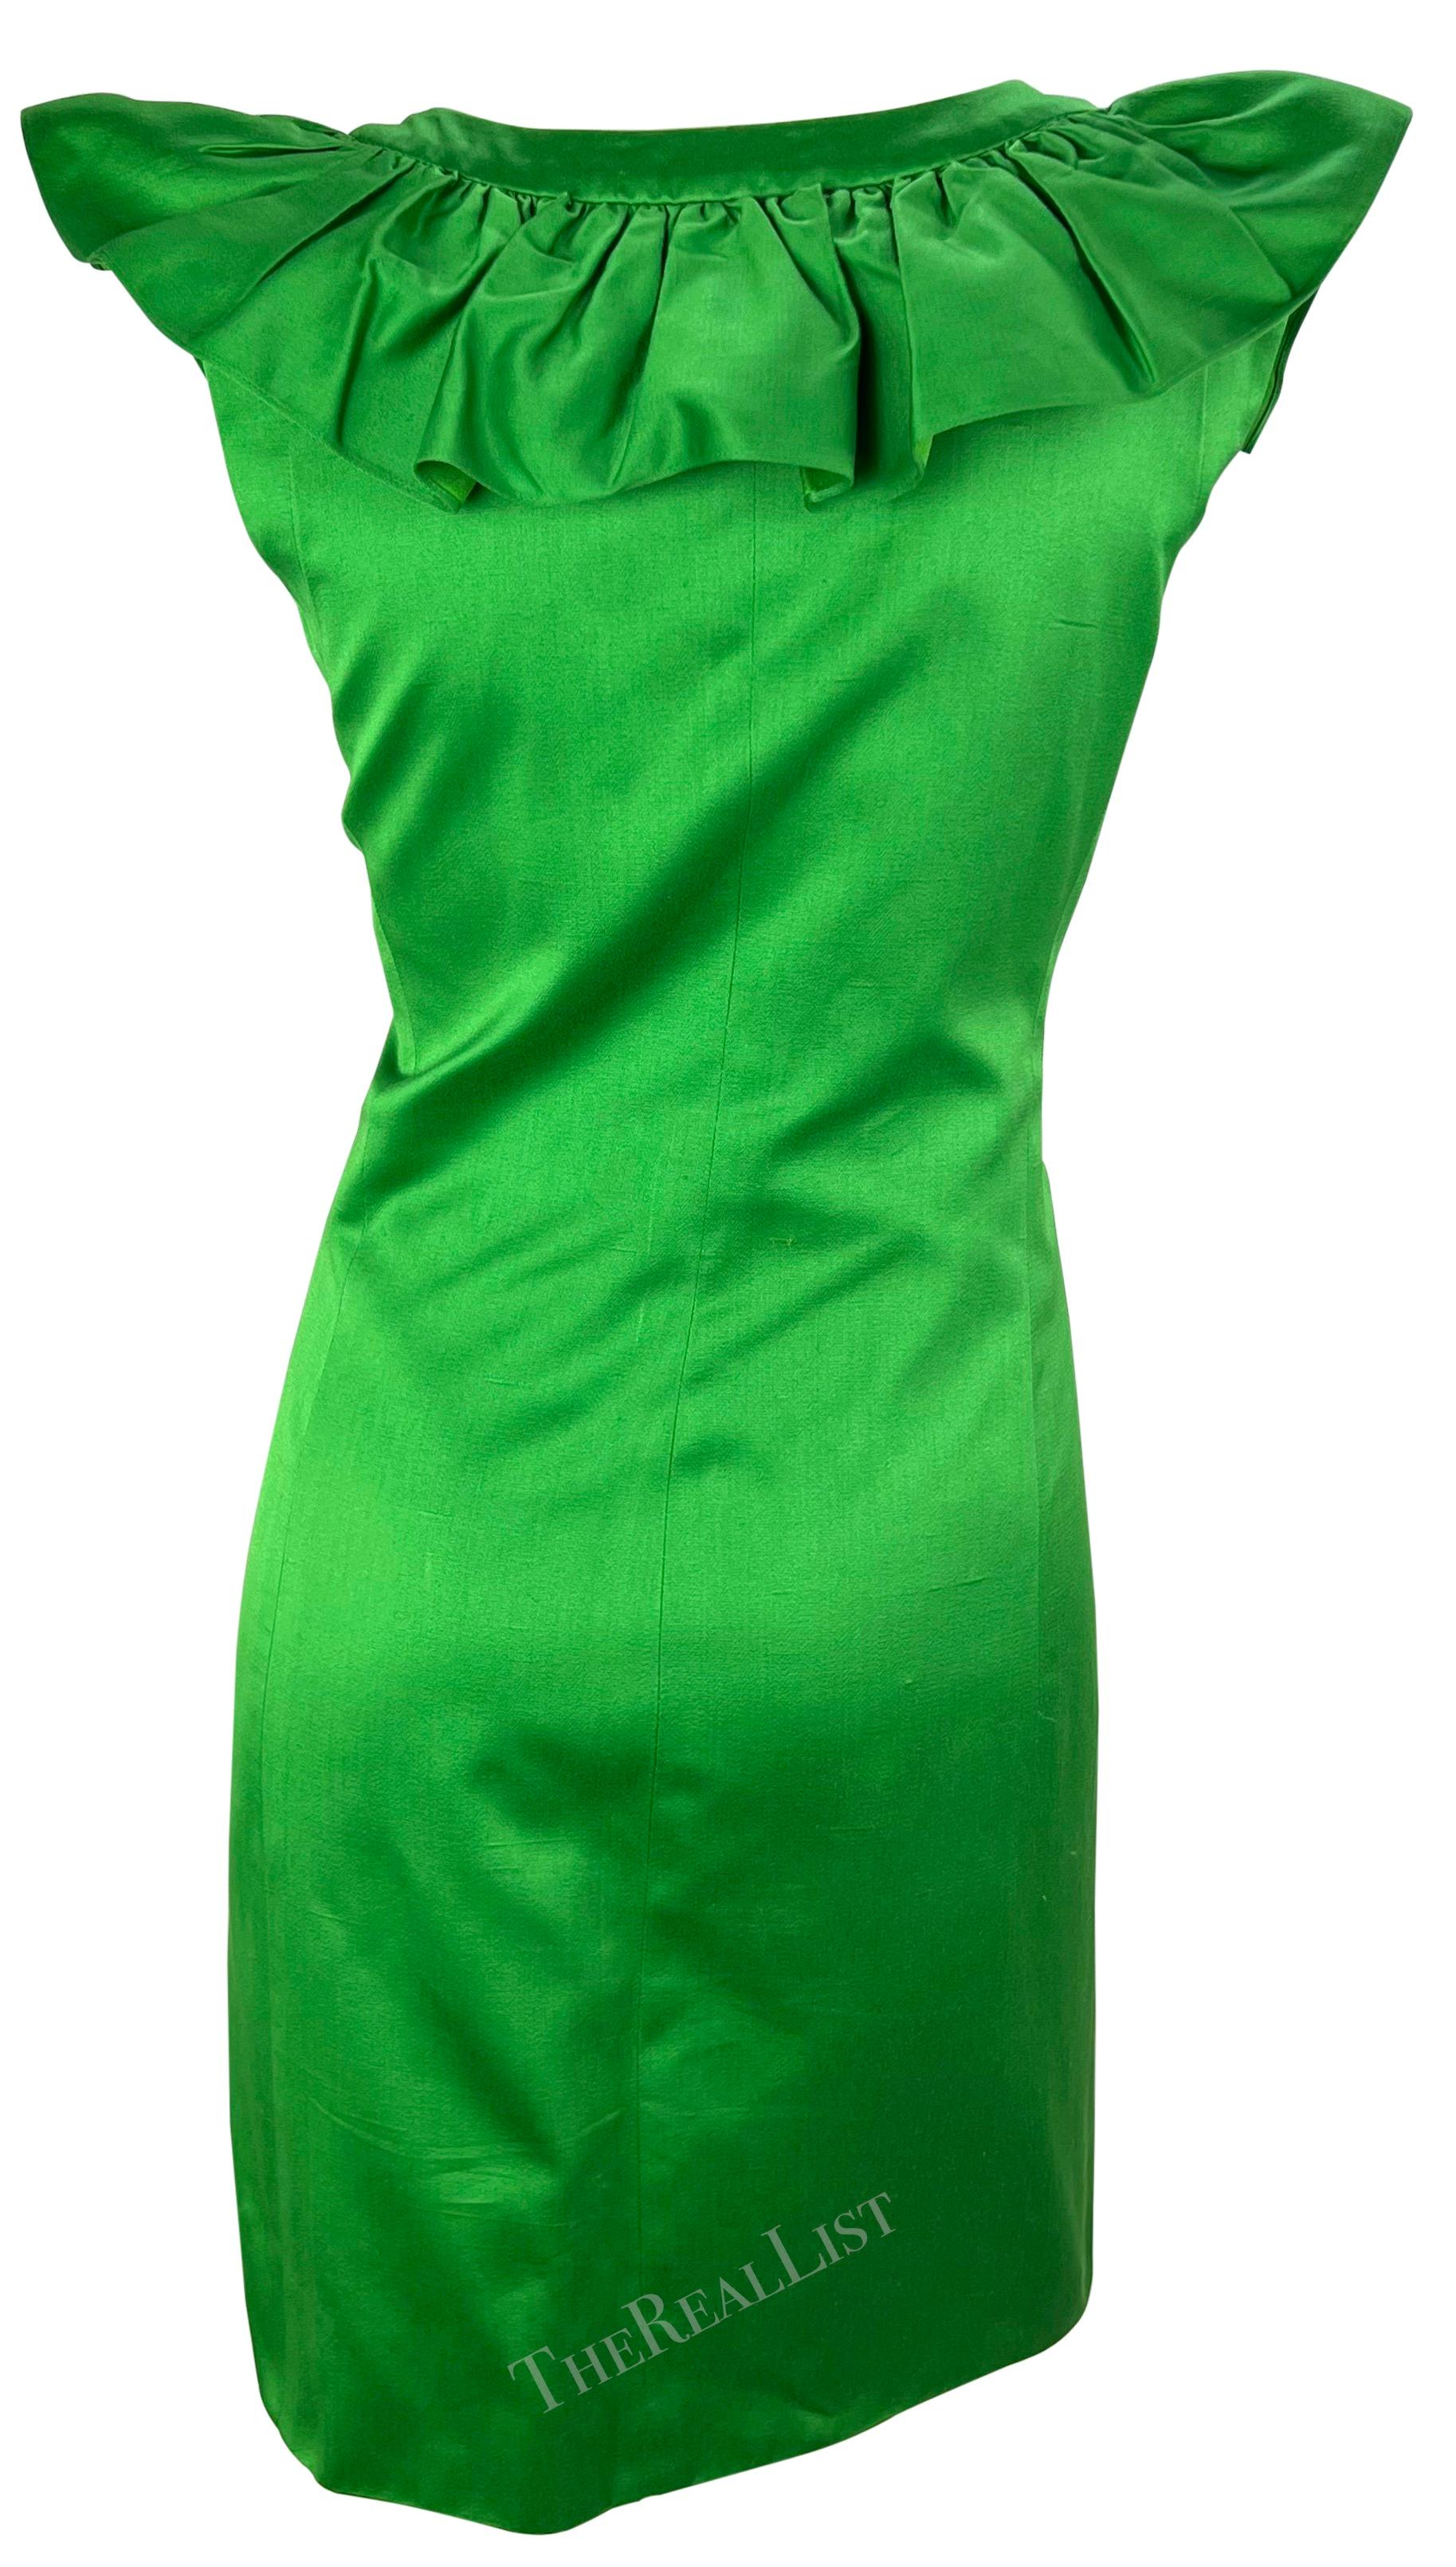 S/S 1992 Yves Saint Laurent Runway Ad Bright Green Ruffle Heart Button Dress For Sale 4